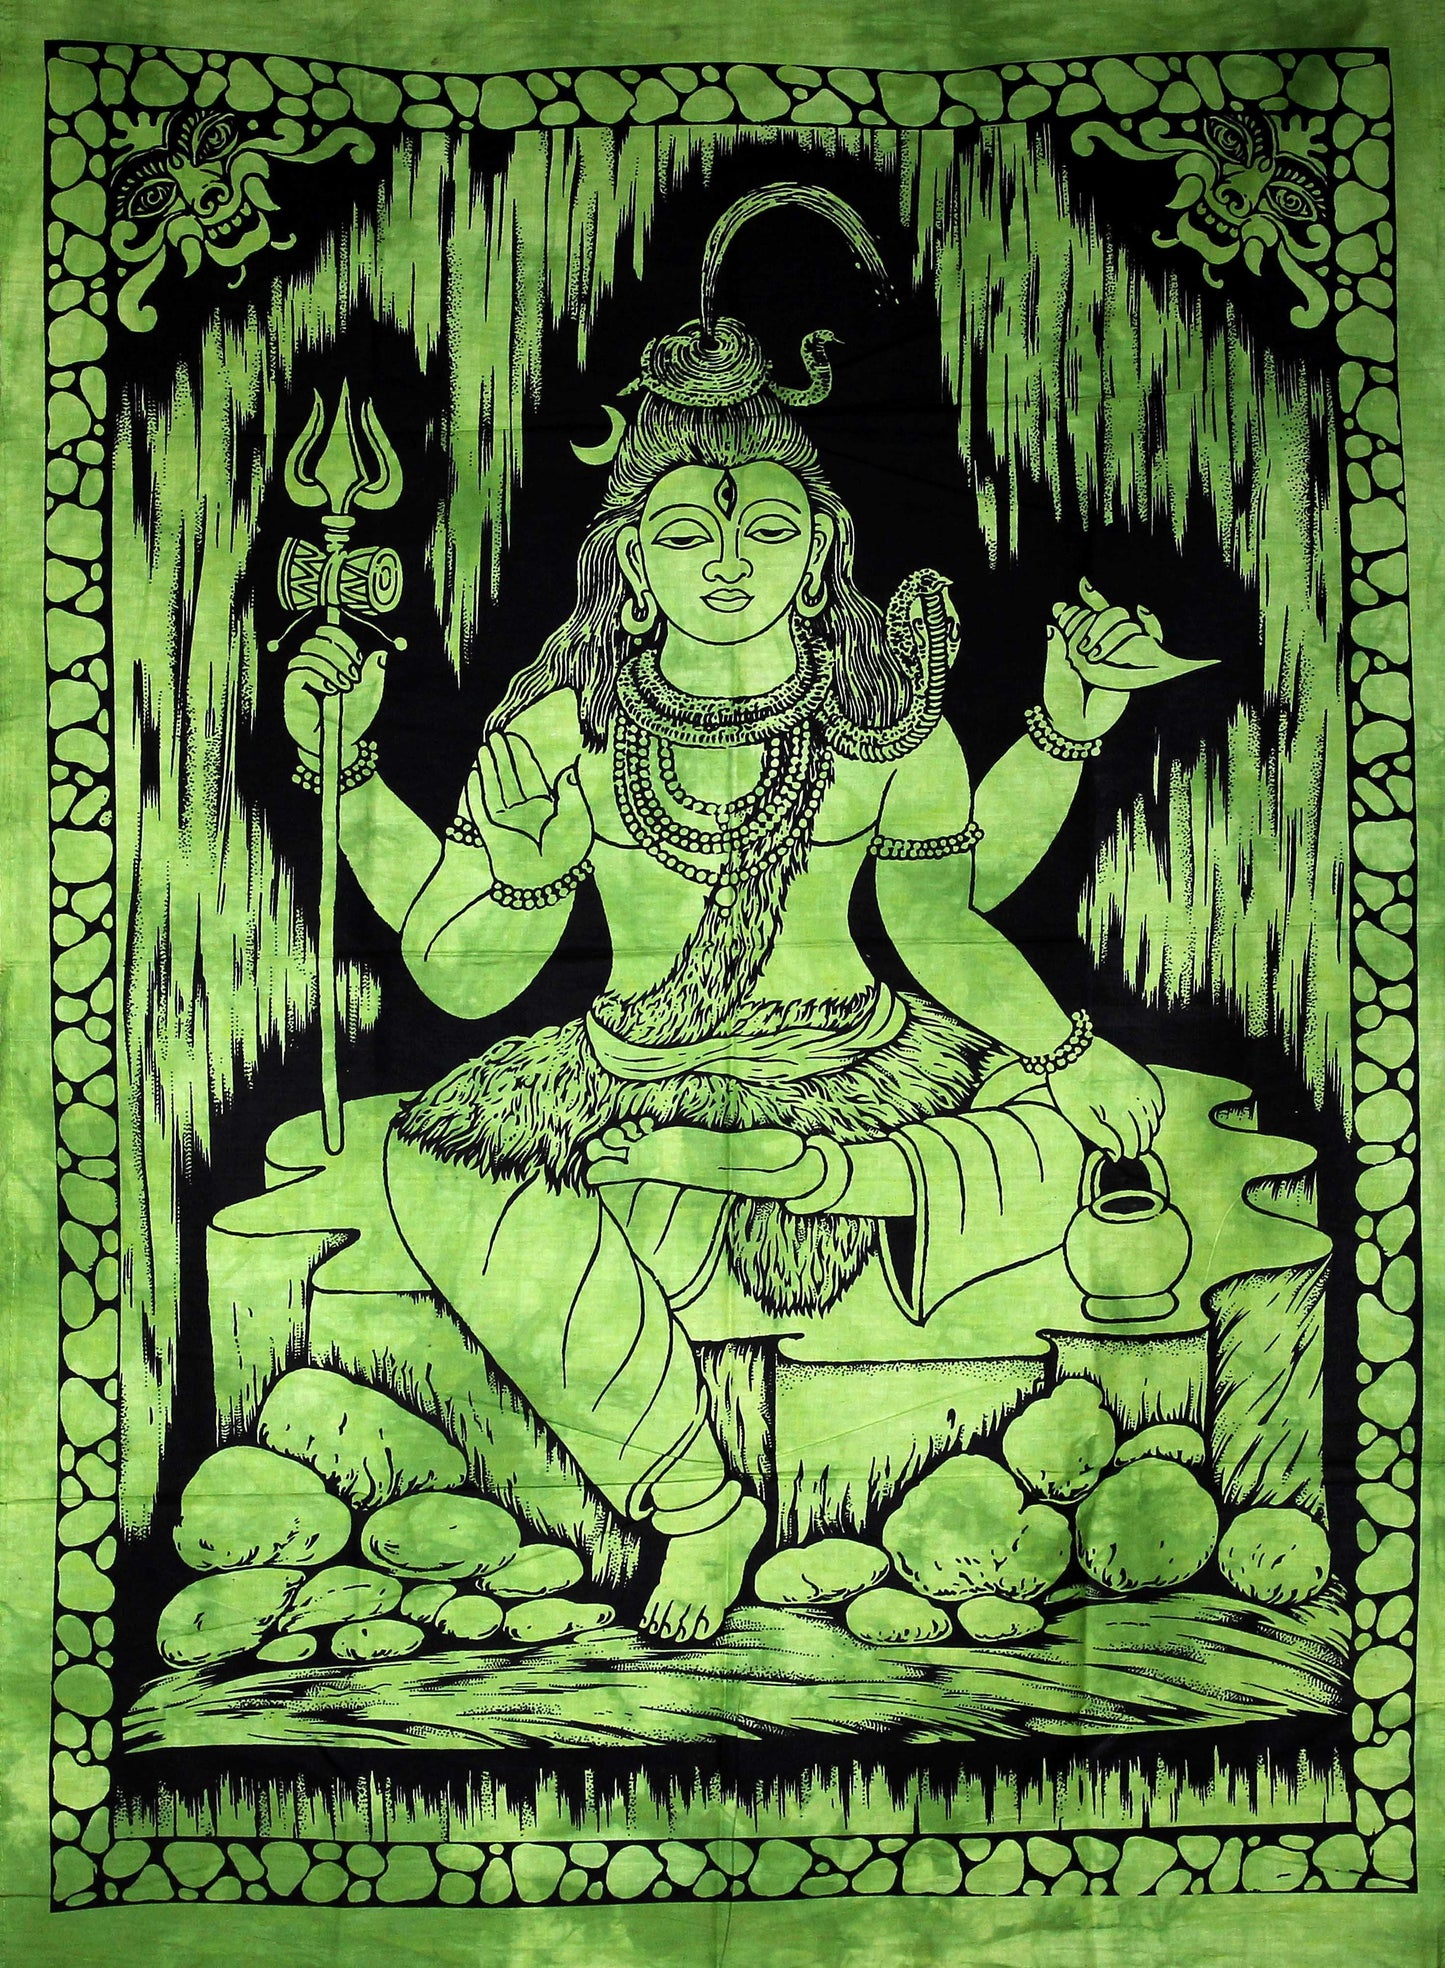 Hand printed Mini Lord Shiva Tapestries Wall Hangings - Available in 3 Colors